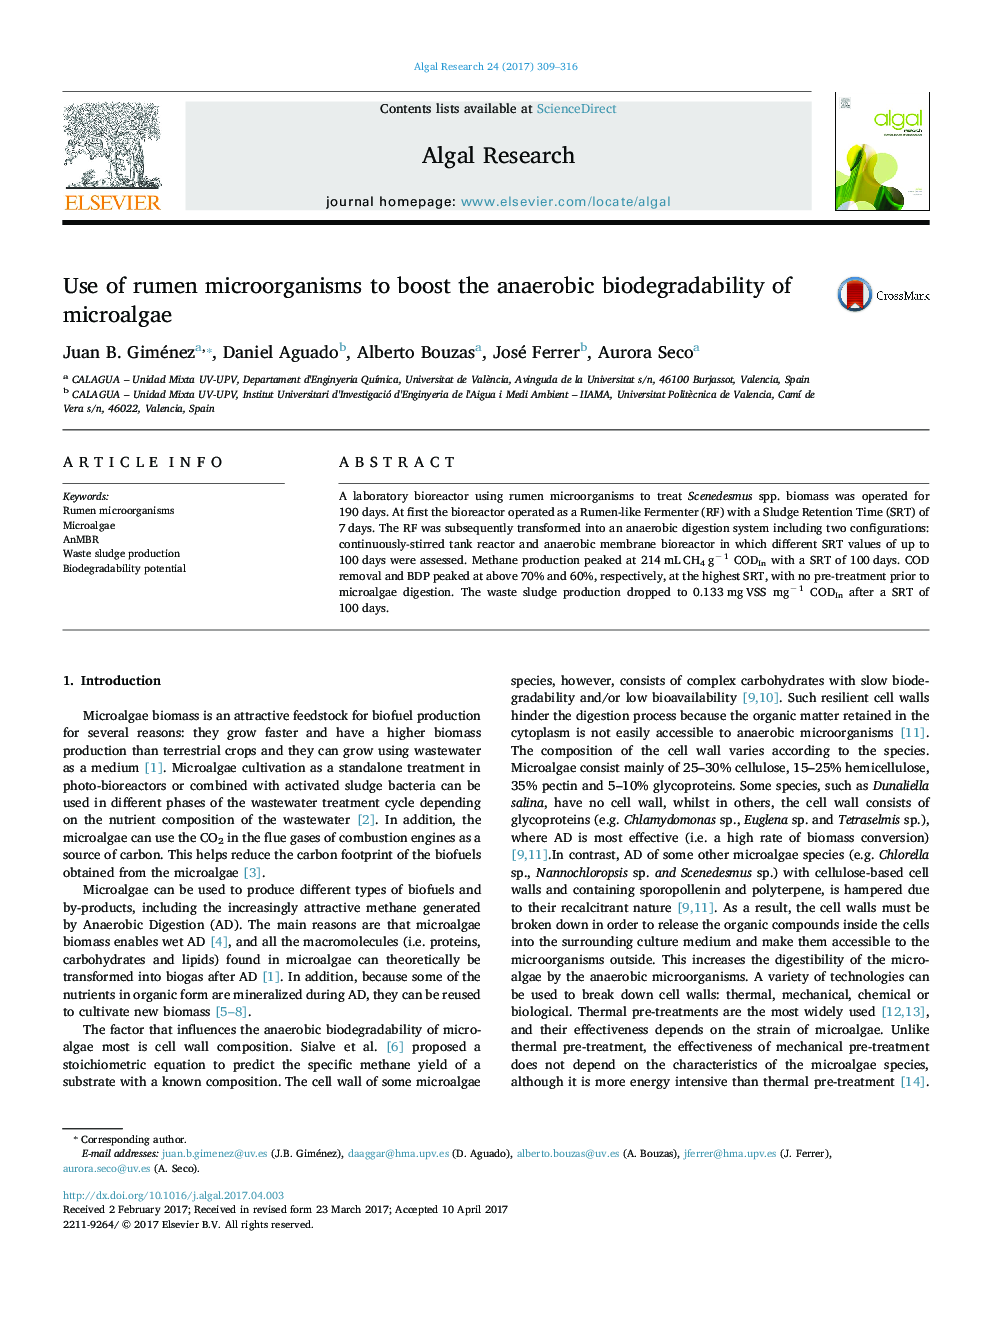 Use of rumen microorganisms to boost the anaerobic biodegradability of microalgae